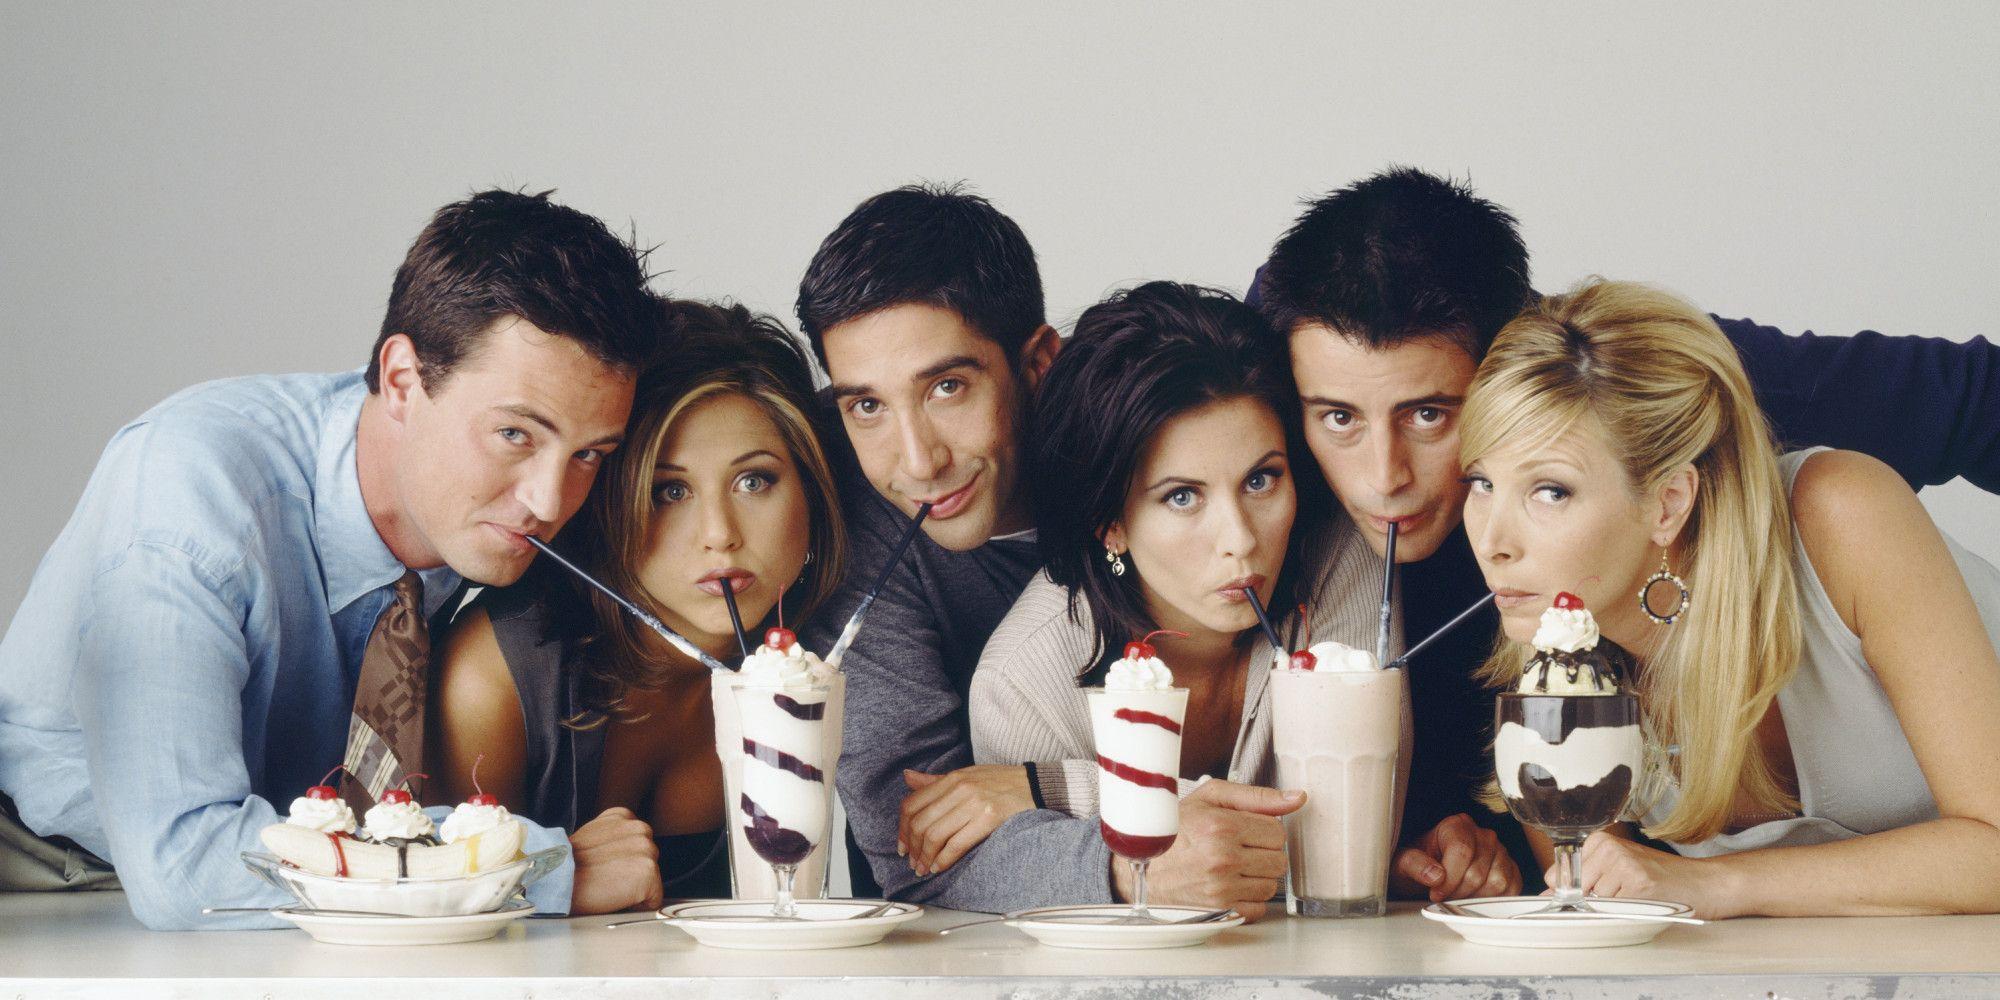 Friends Wallpaper High Resolution and Quality Download